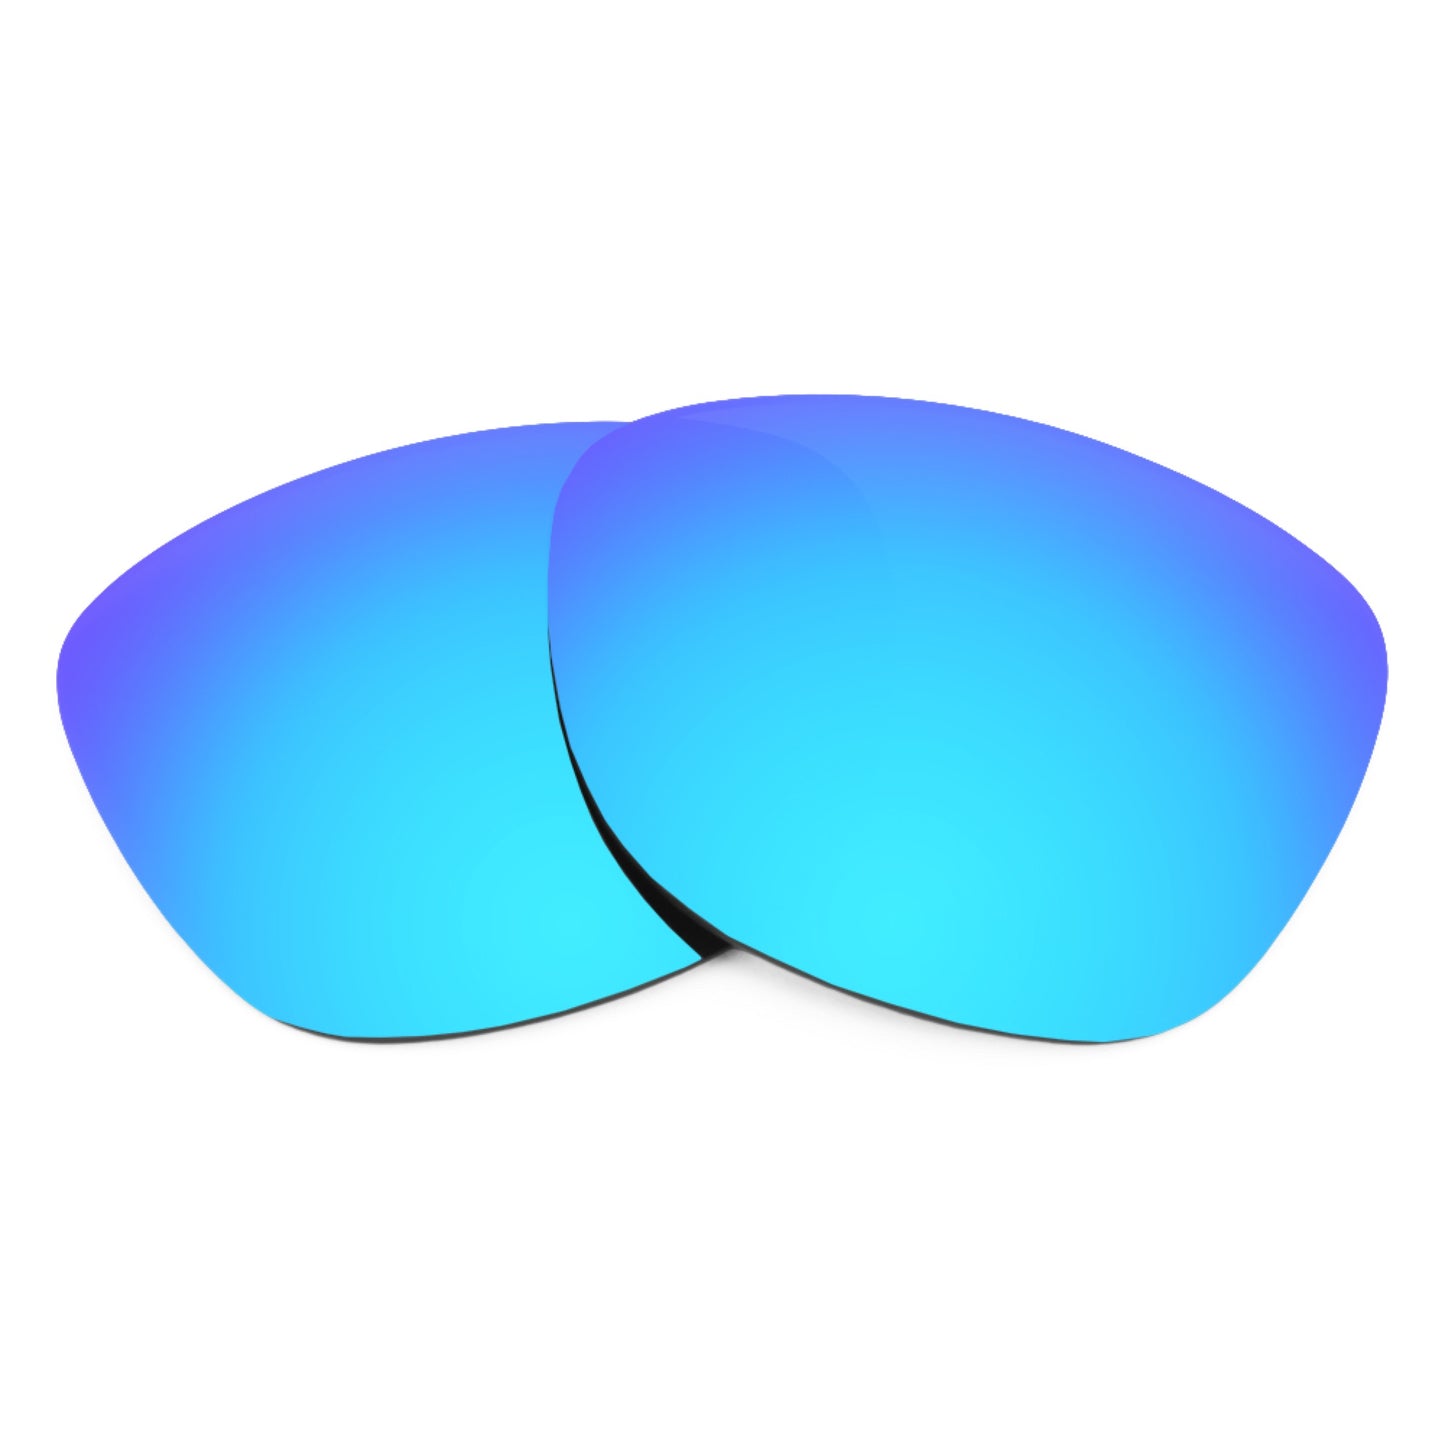 Revant replacement lenses for Ray-Ban Justin Classic RB4165 55mm Non-Polarized Ice Blue